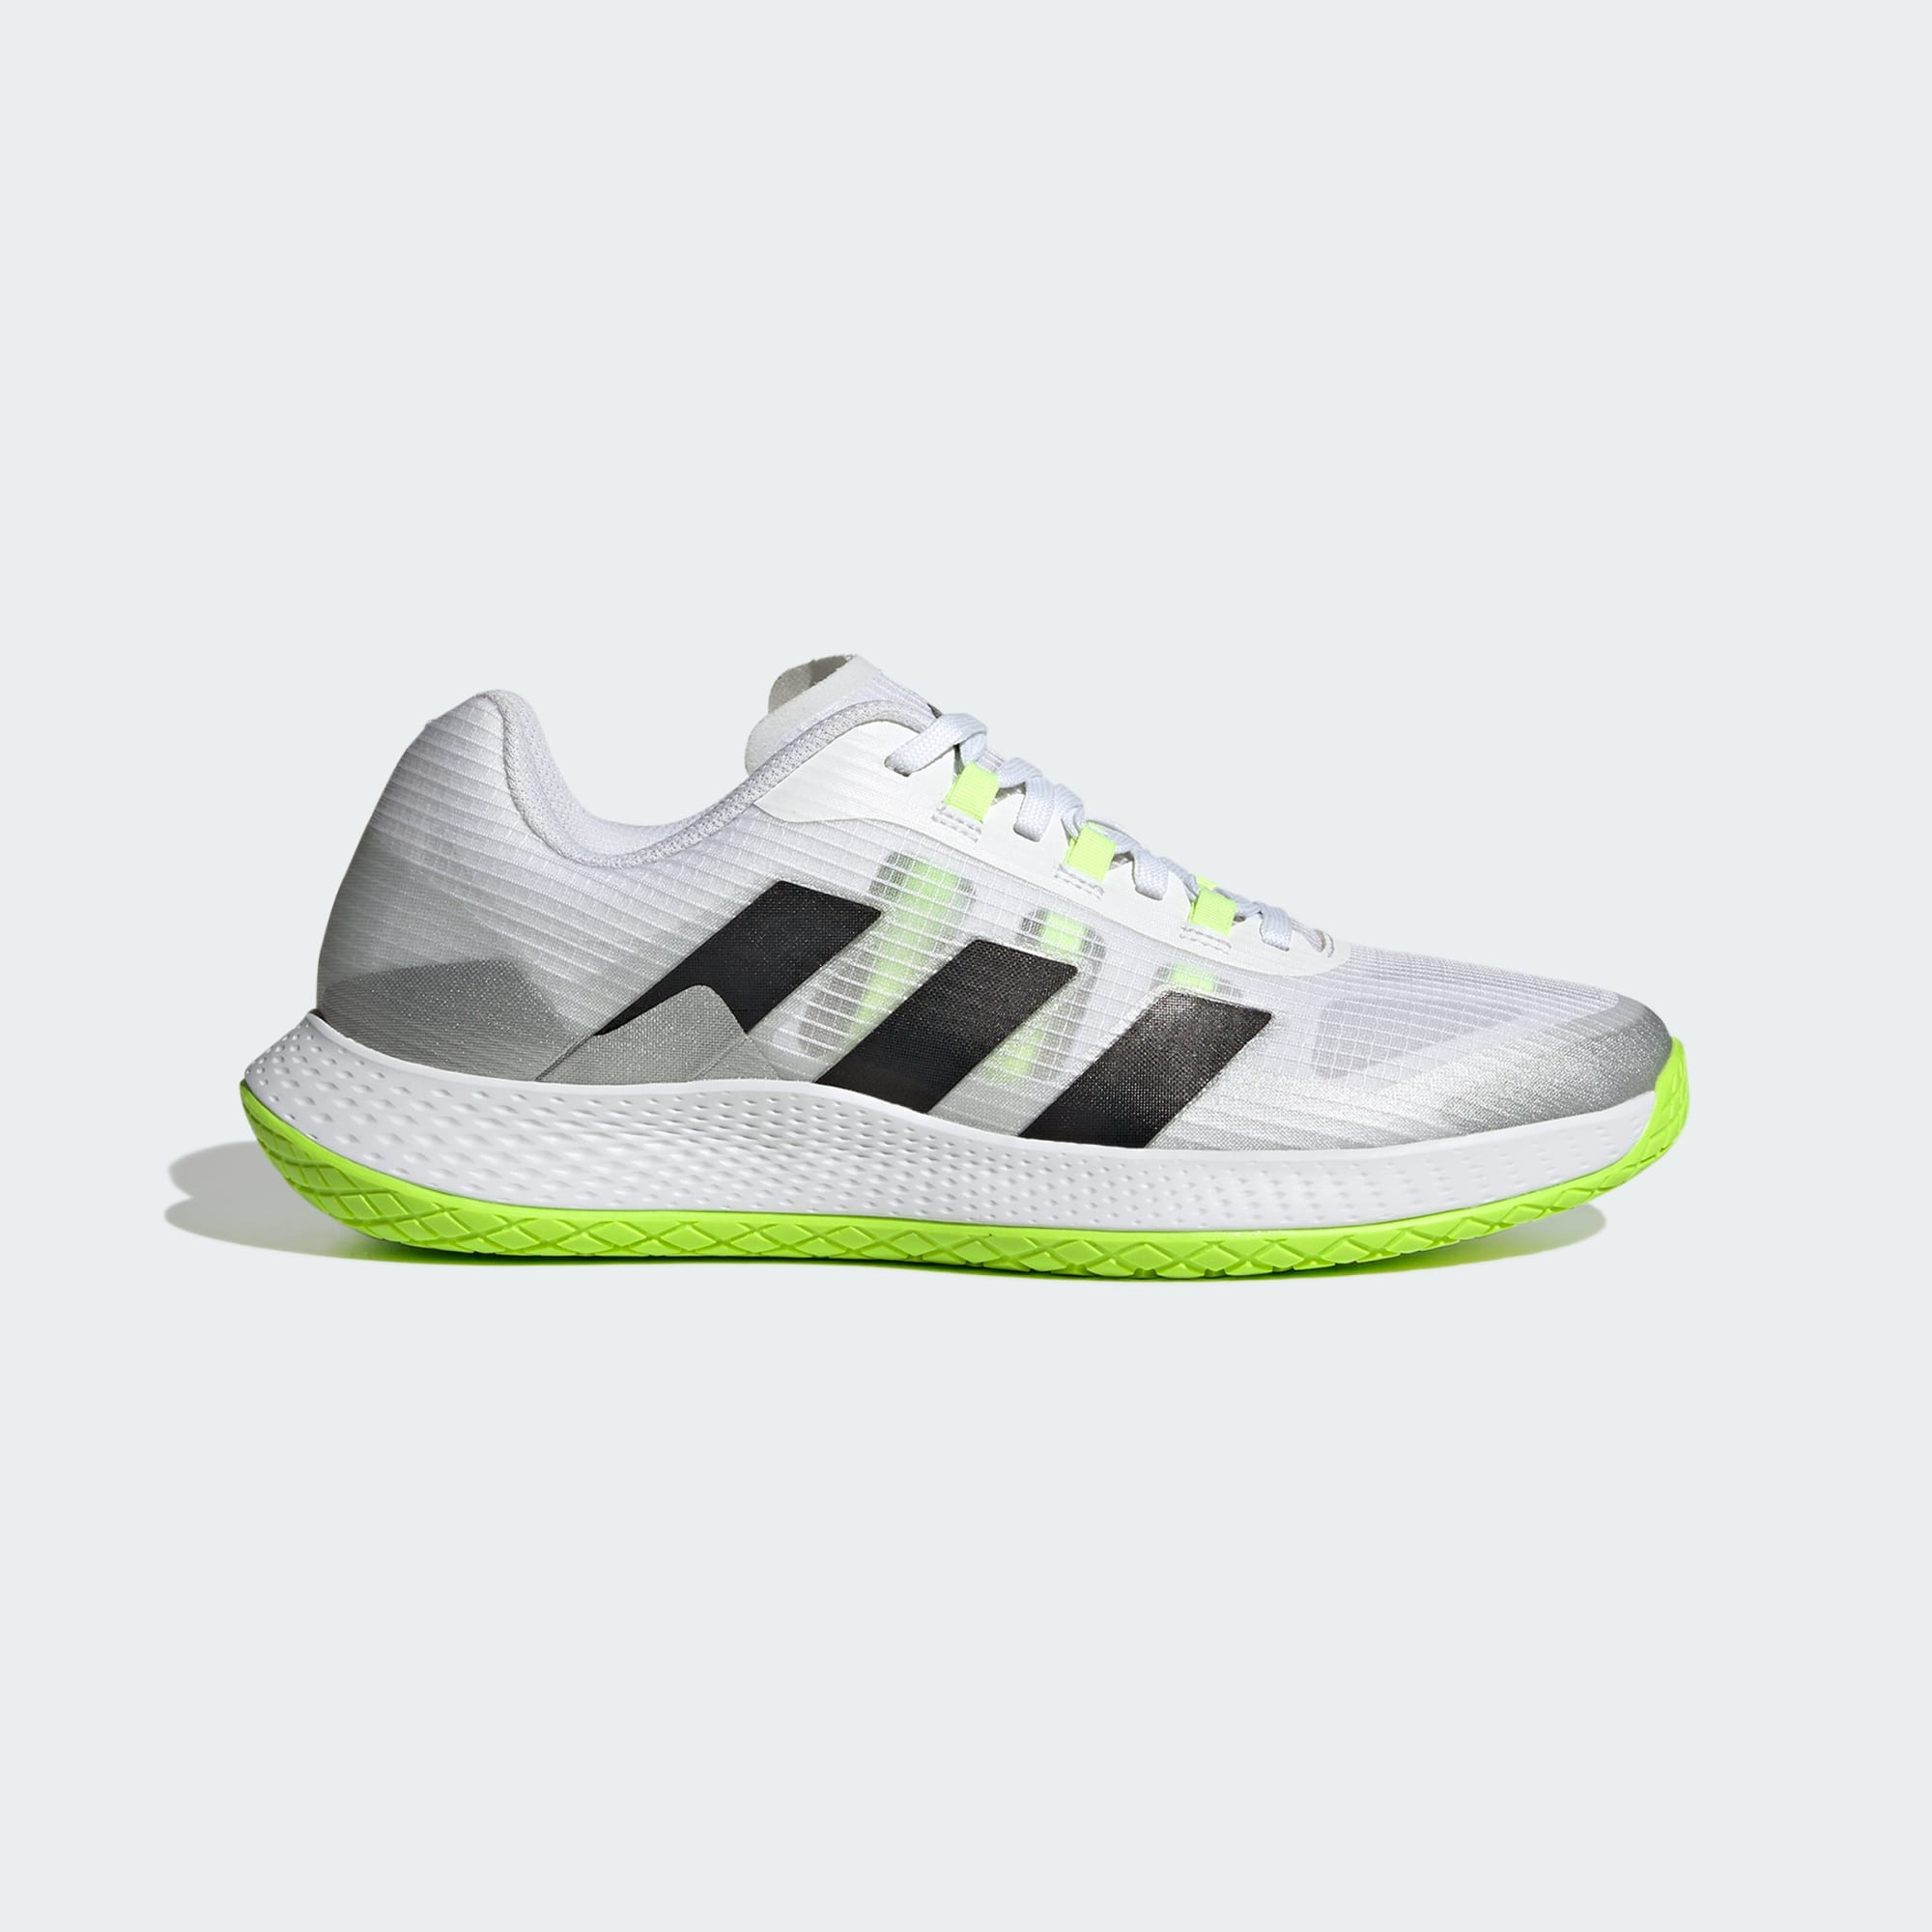 adidas Forcebounce Volleyball Shoes (9000157313_69576)